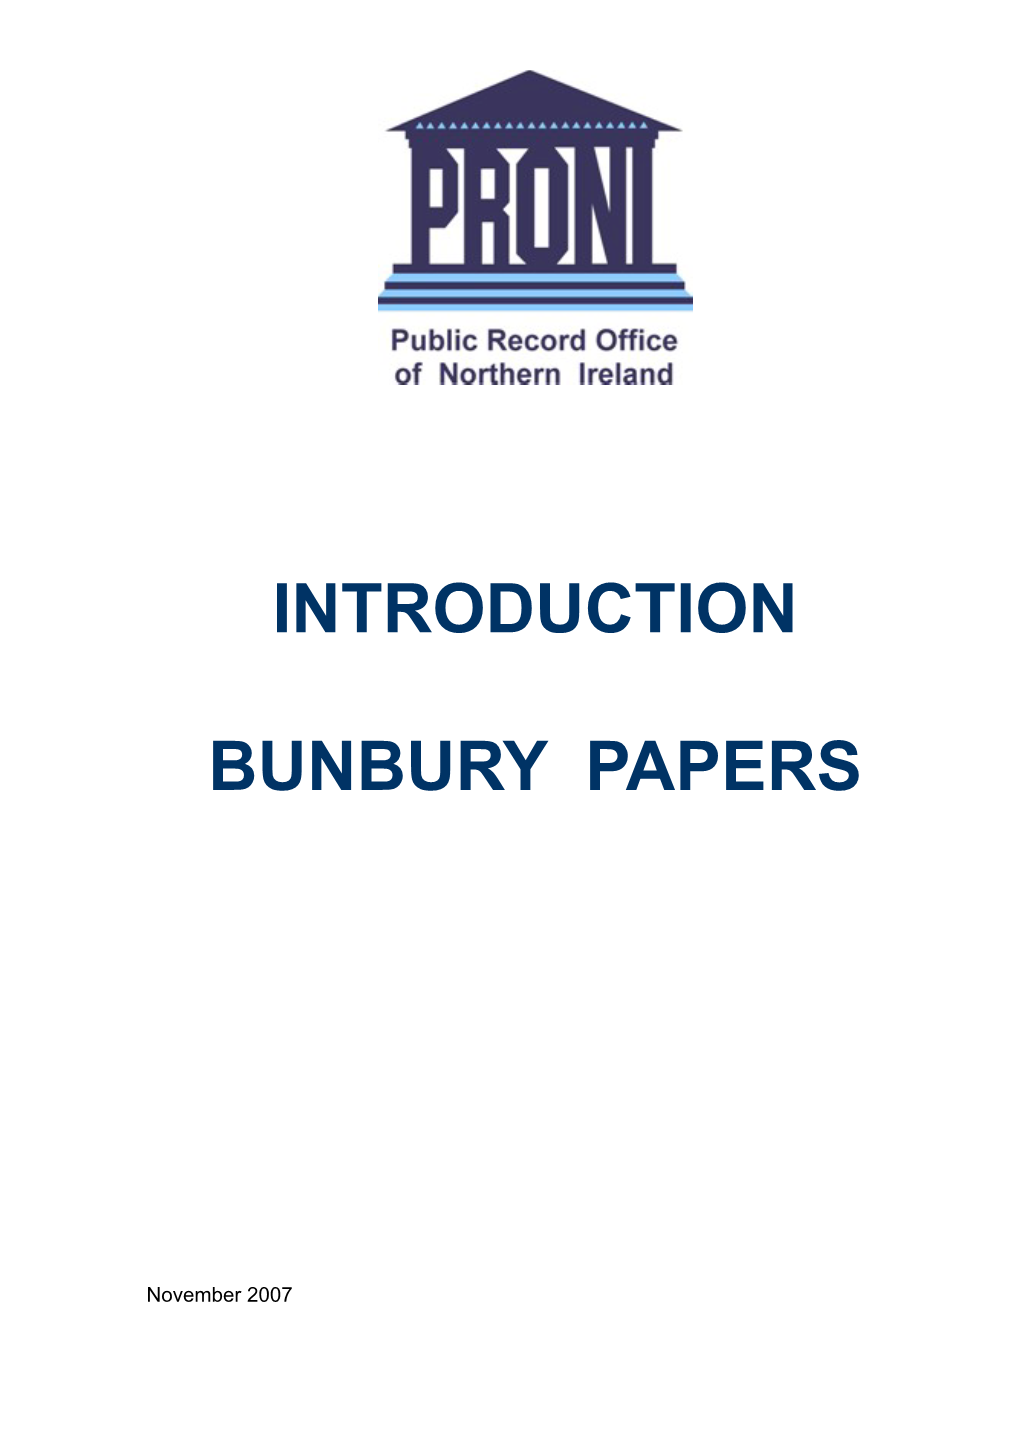 Introduction to the Bunbury Papers